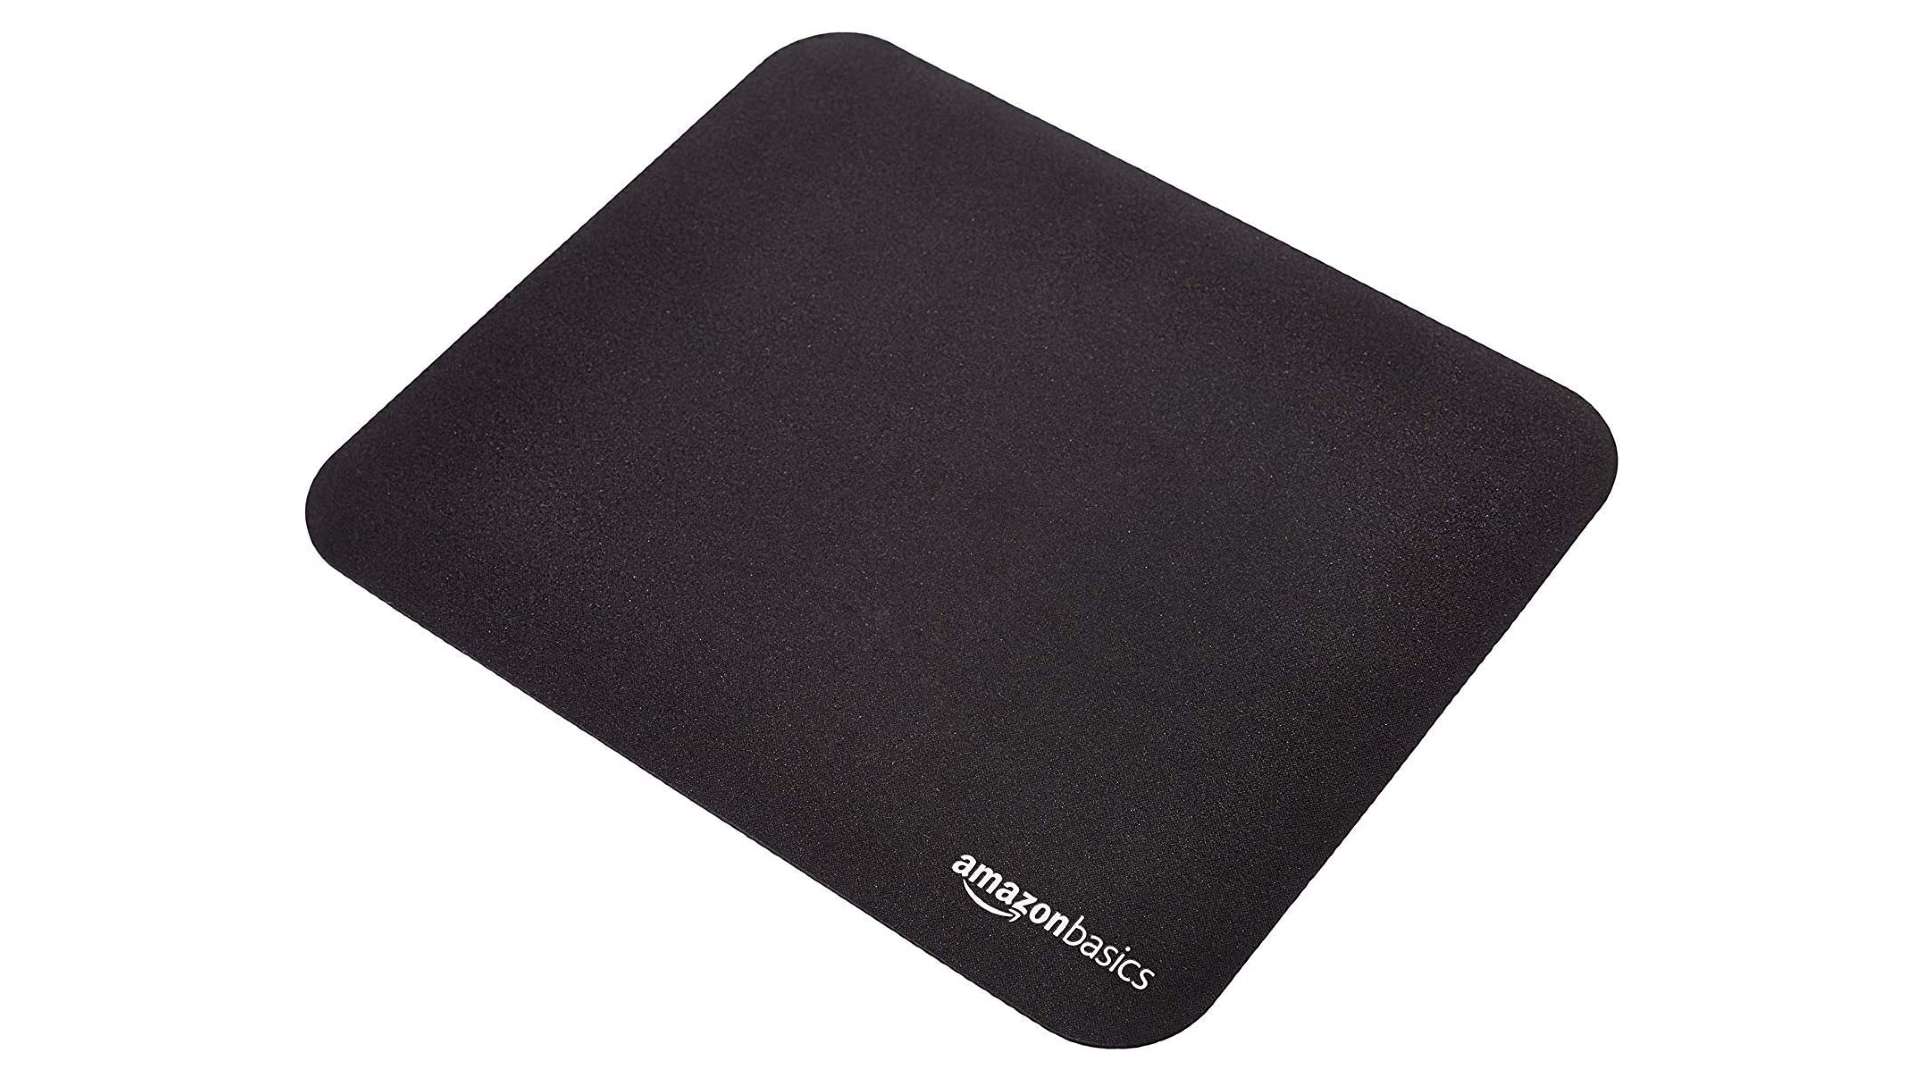 A small black mouse pad with a white Amazon logo in the lower right corner.